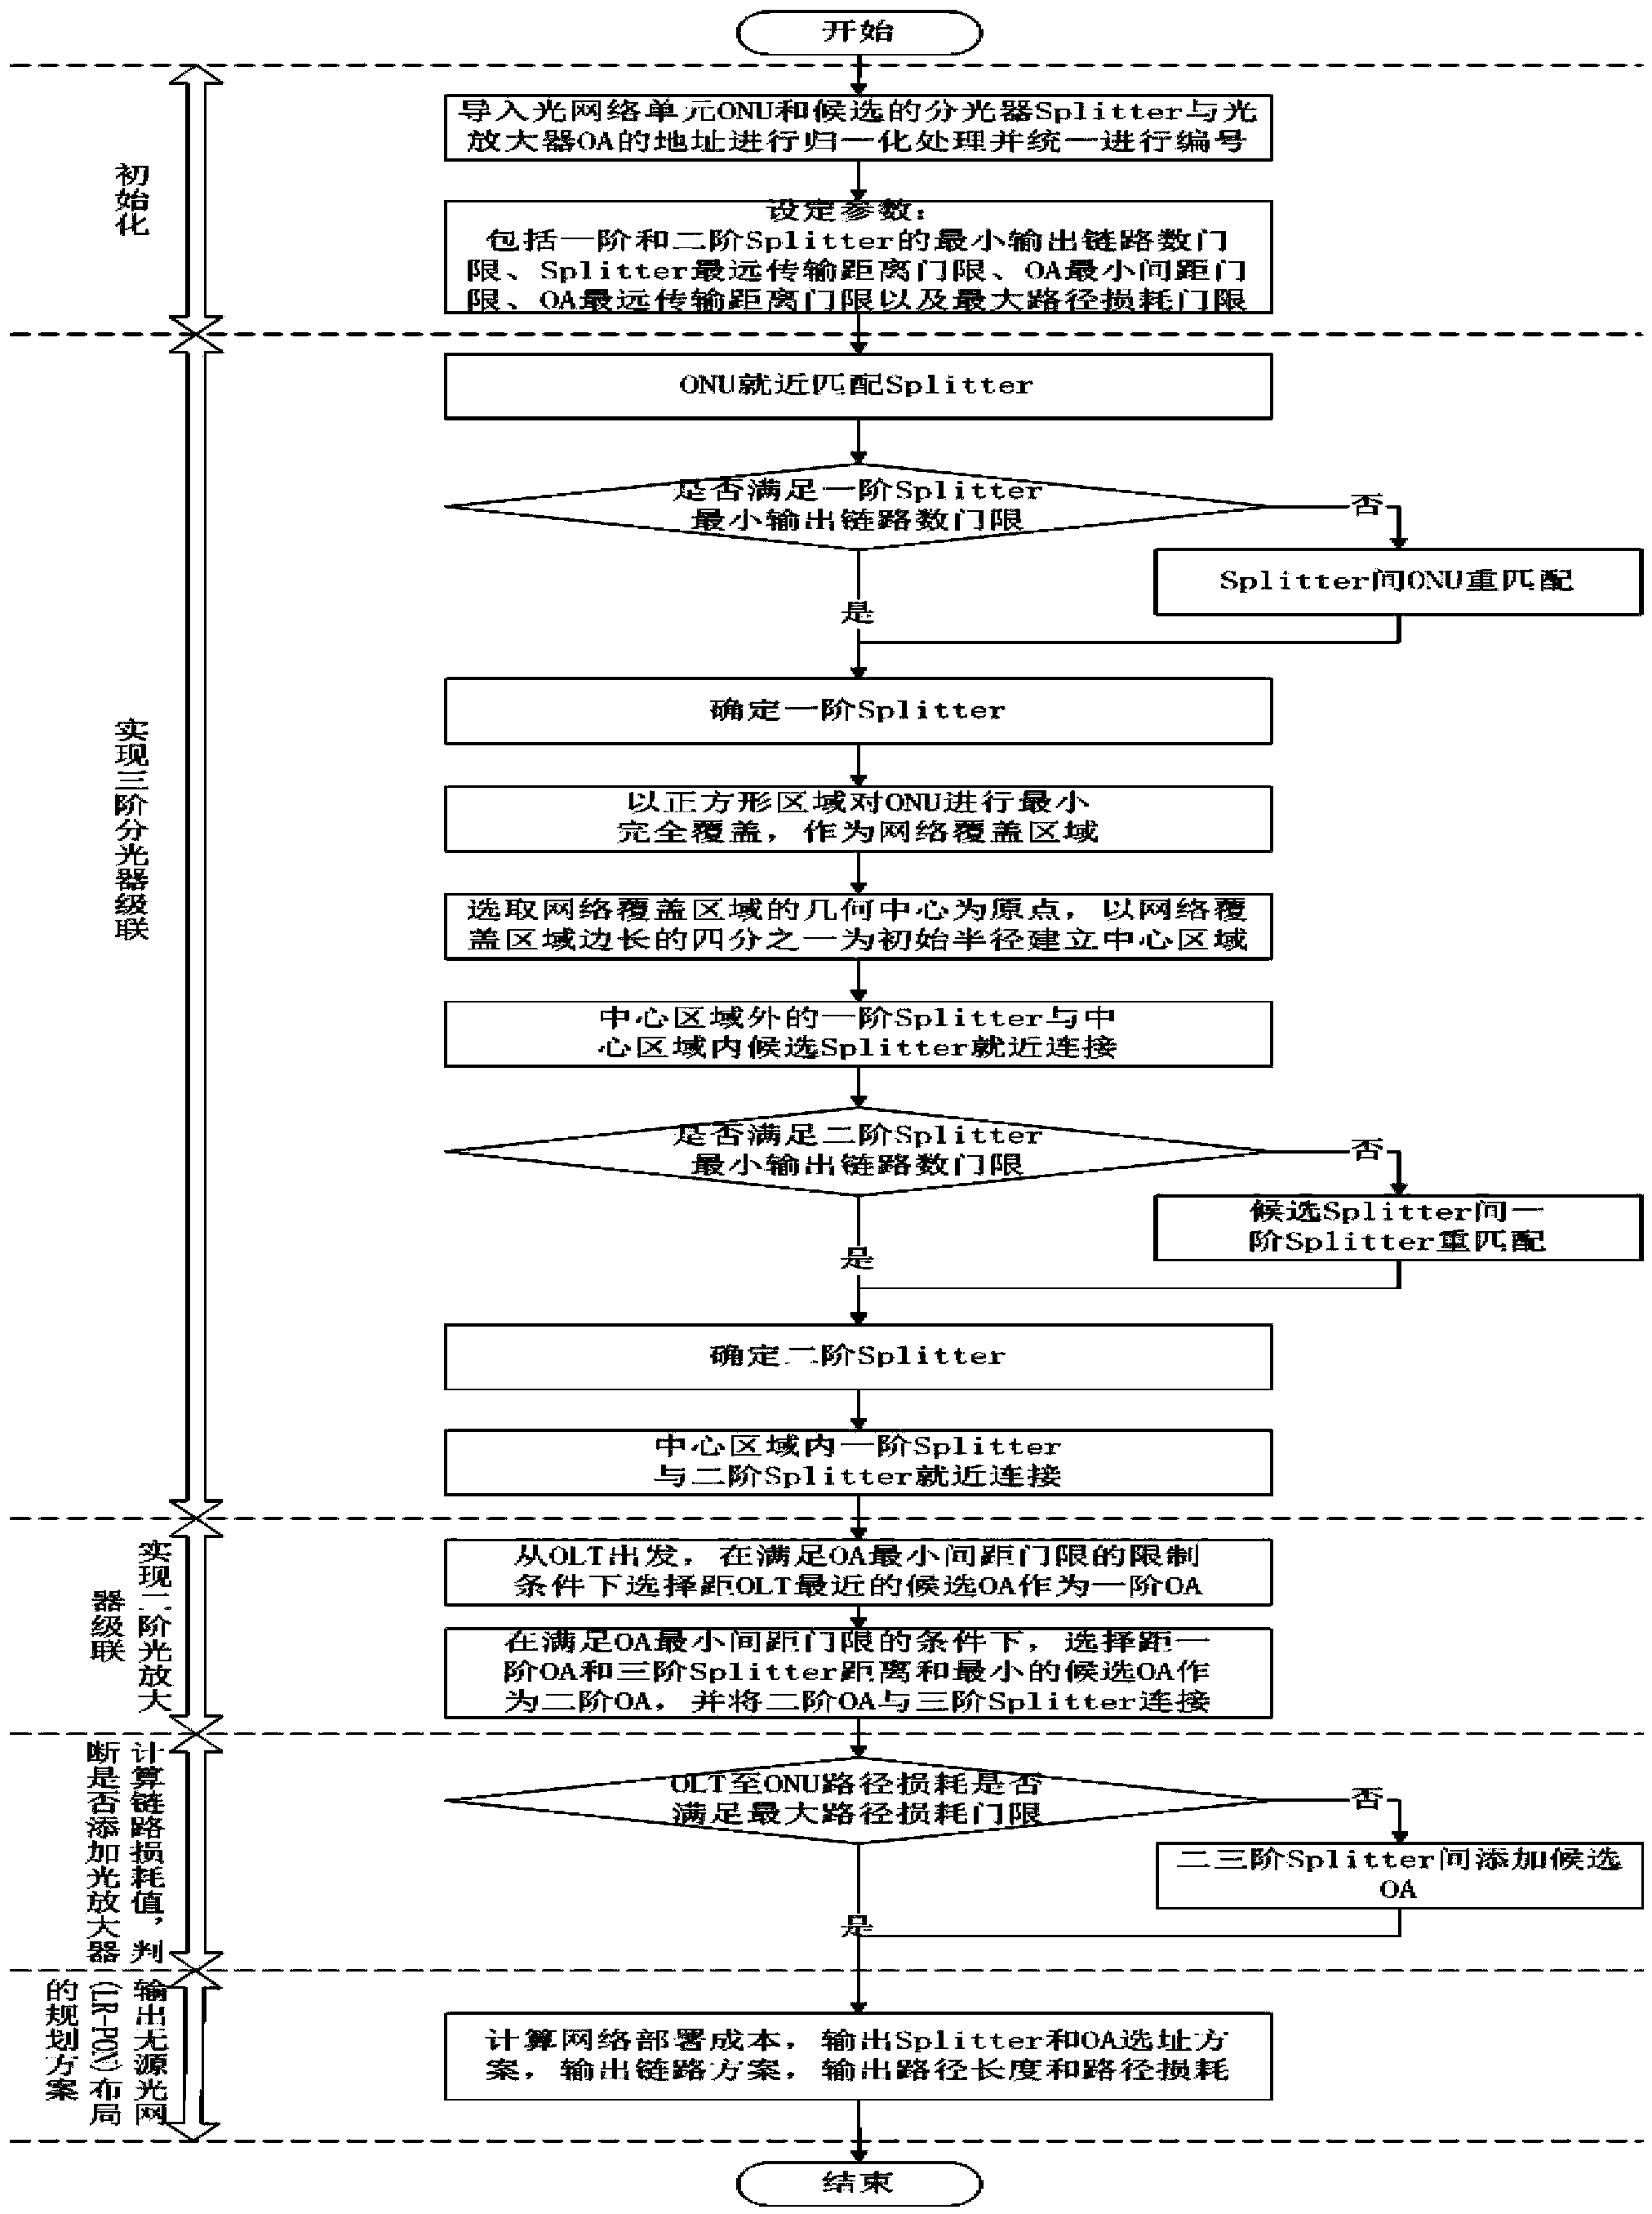 Large-scale user access oriented LR-PON layout planning method